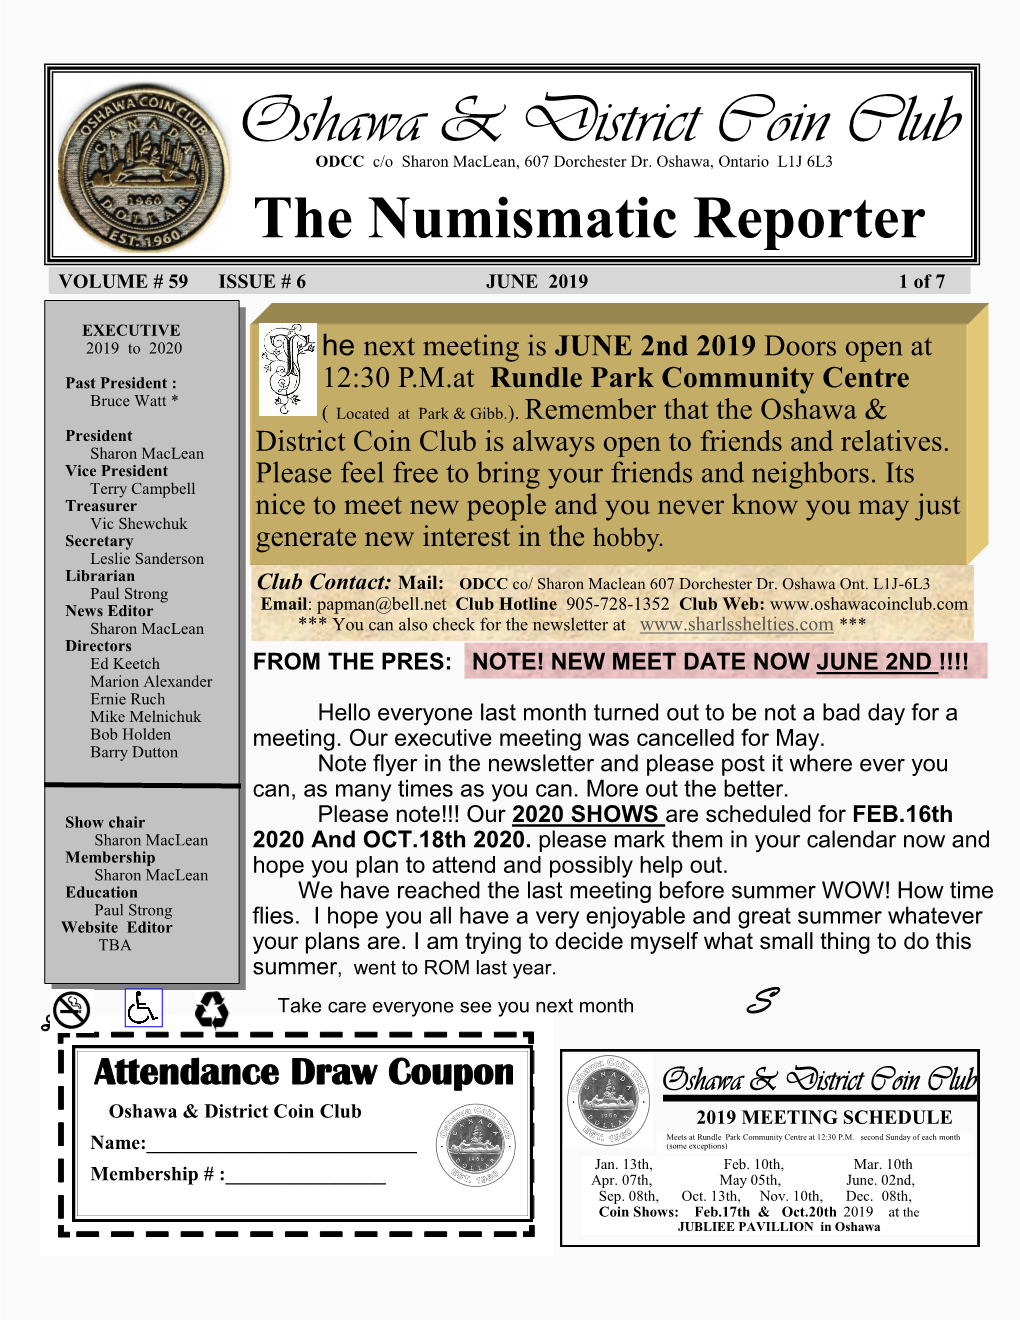 The Numismatic Reporter